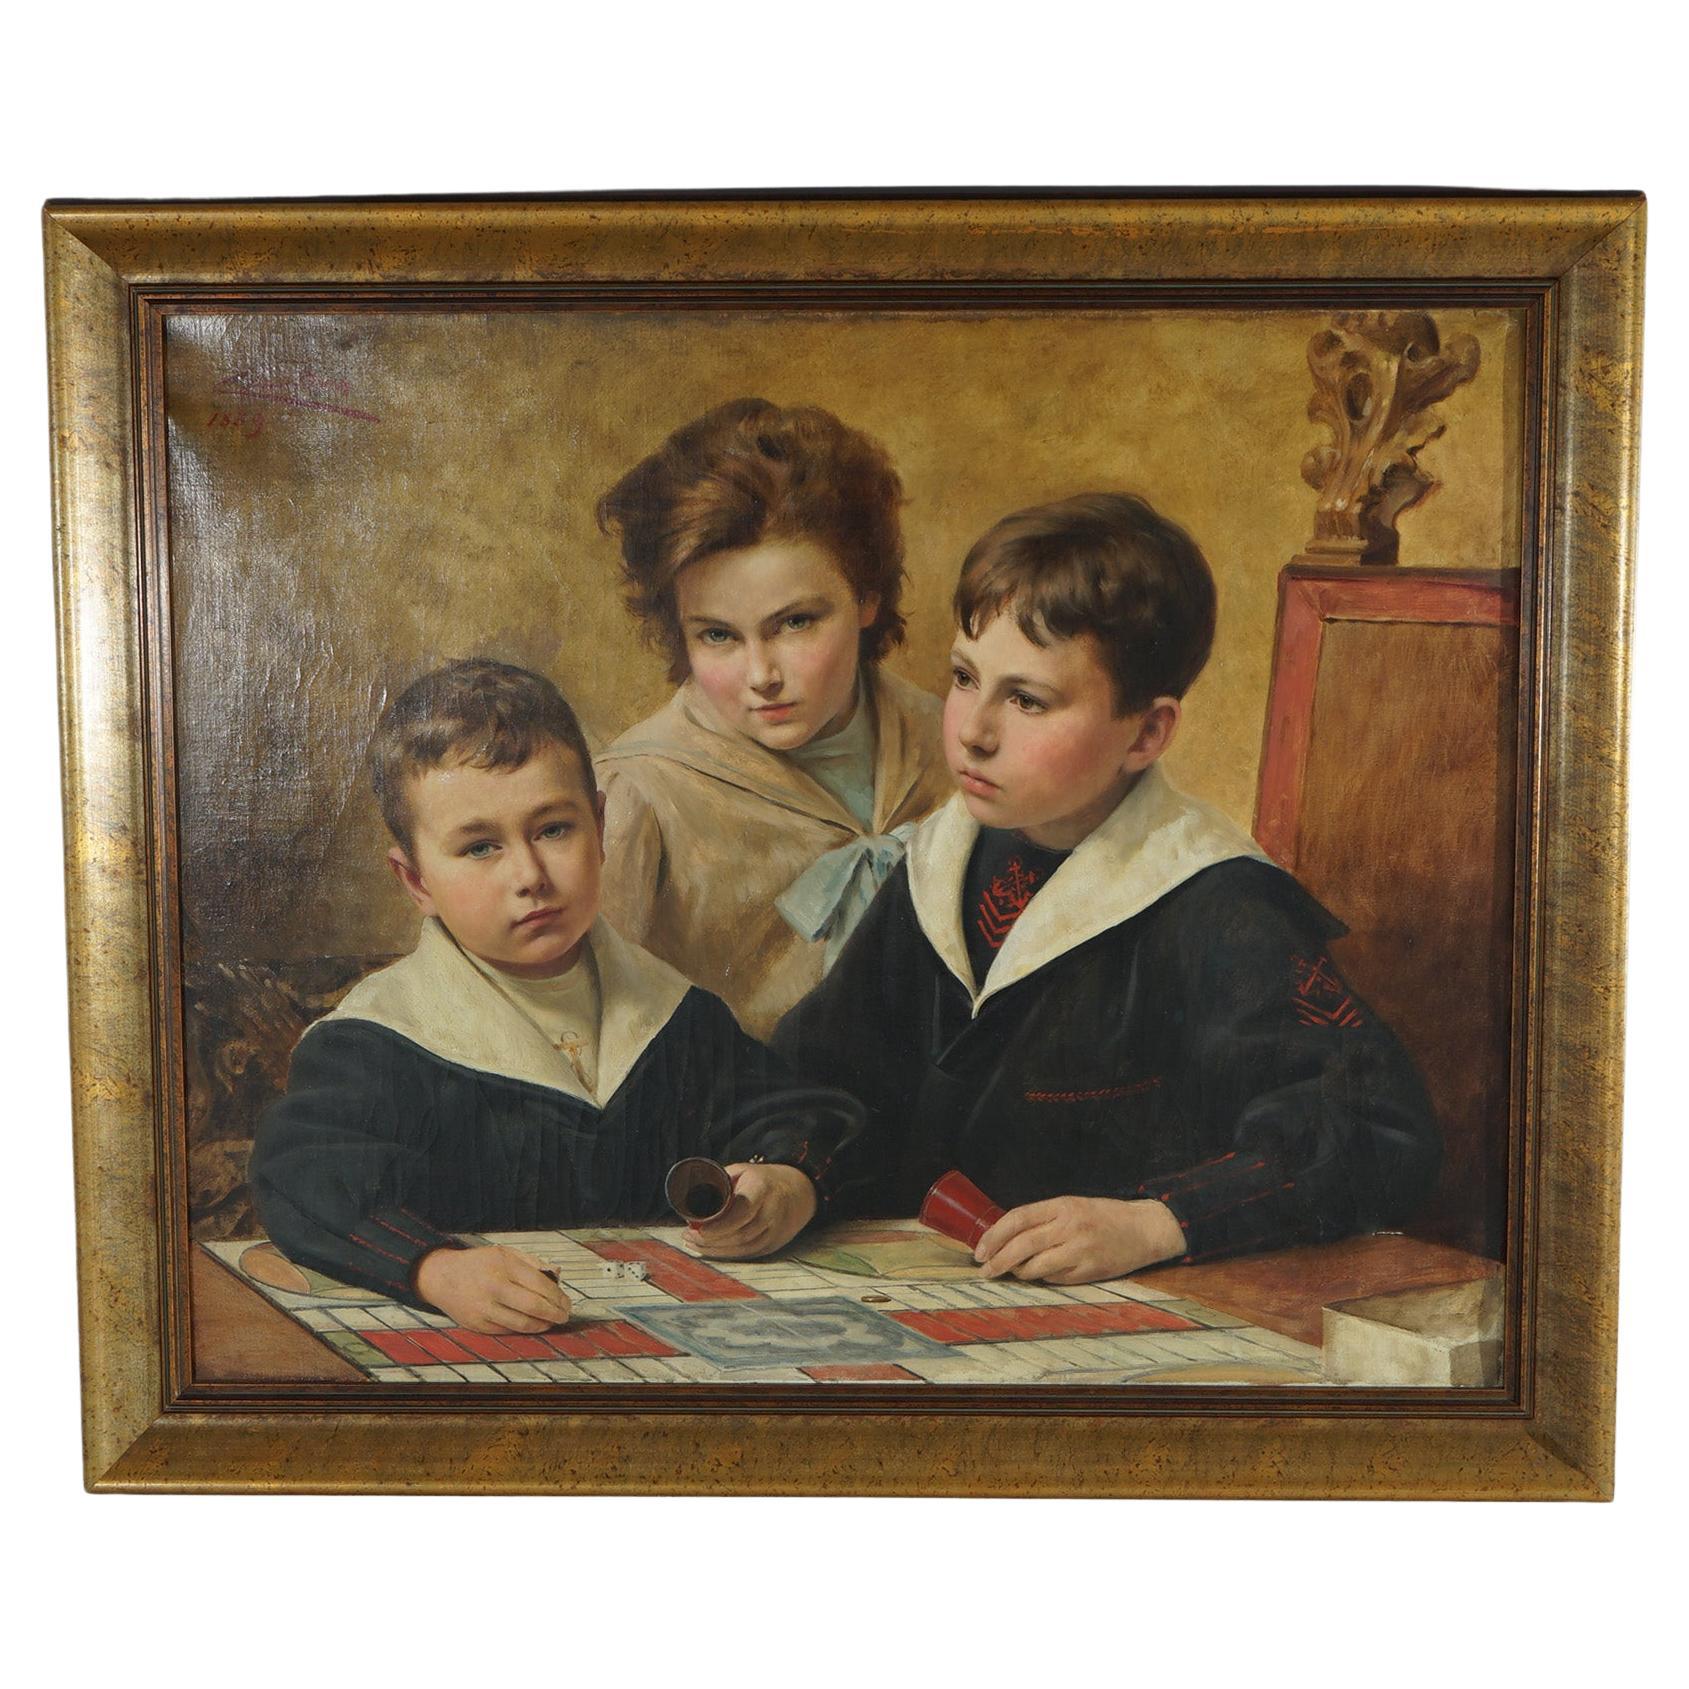 Antique Oil Painting of Children Playing Game (Parcheesi) by T. Chartran, c1889